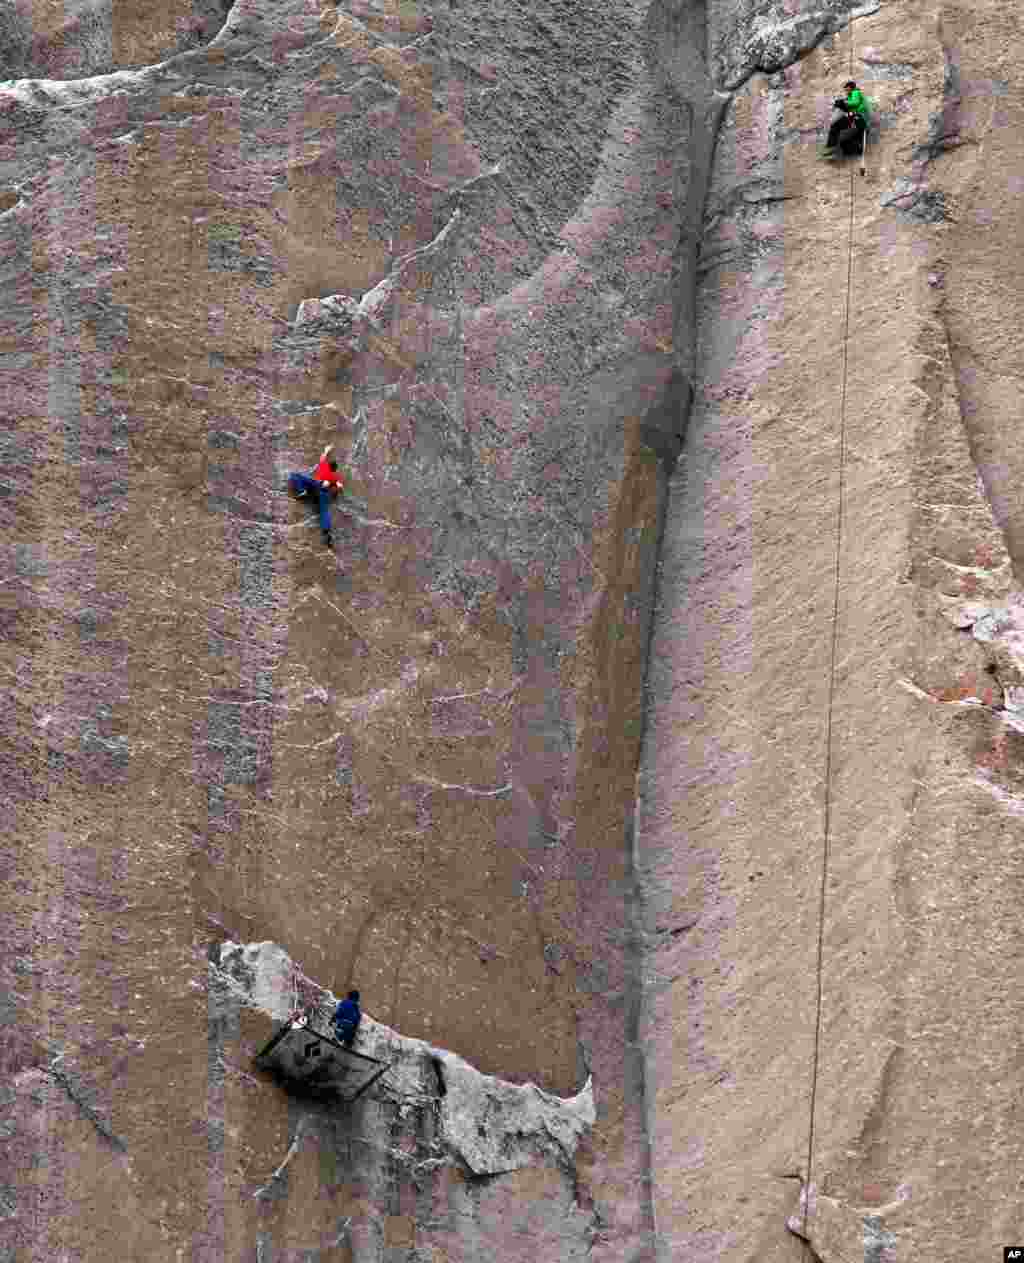 In this Jan. 8, 2015 photo provided by Tom Evans, Tommy Caldwell (in red) climbs Pitch 19 as Kevin Jorgeson secures rope on a rest day, Yosemite National Park, California.